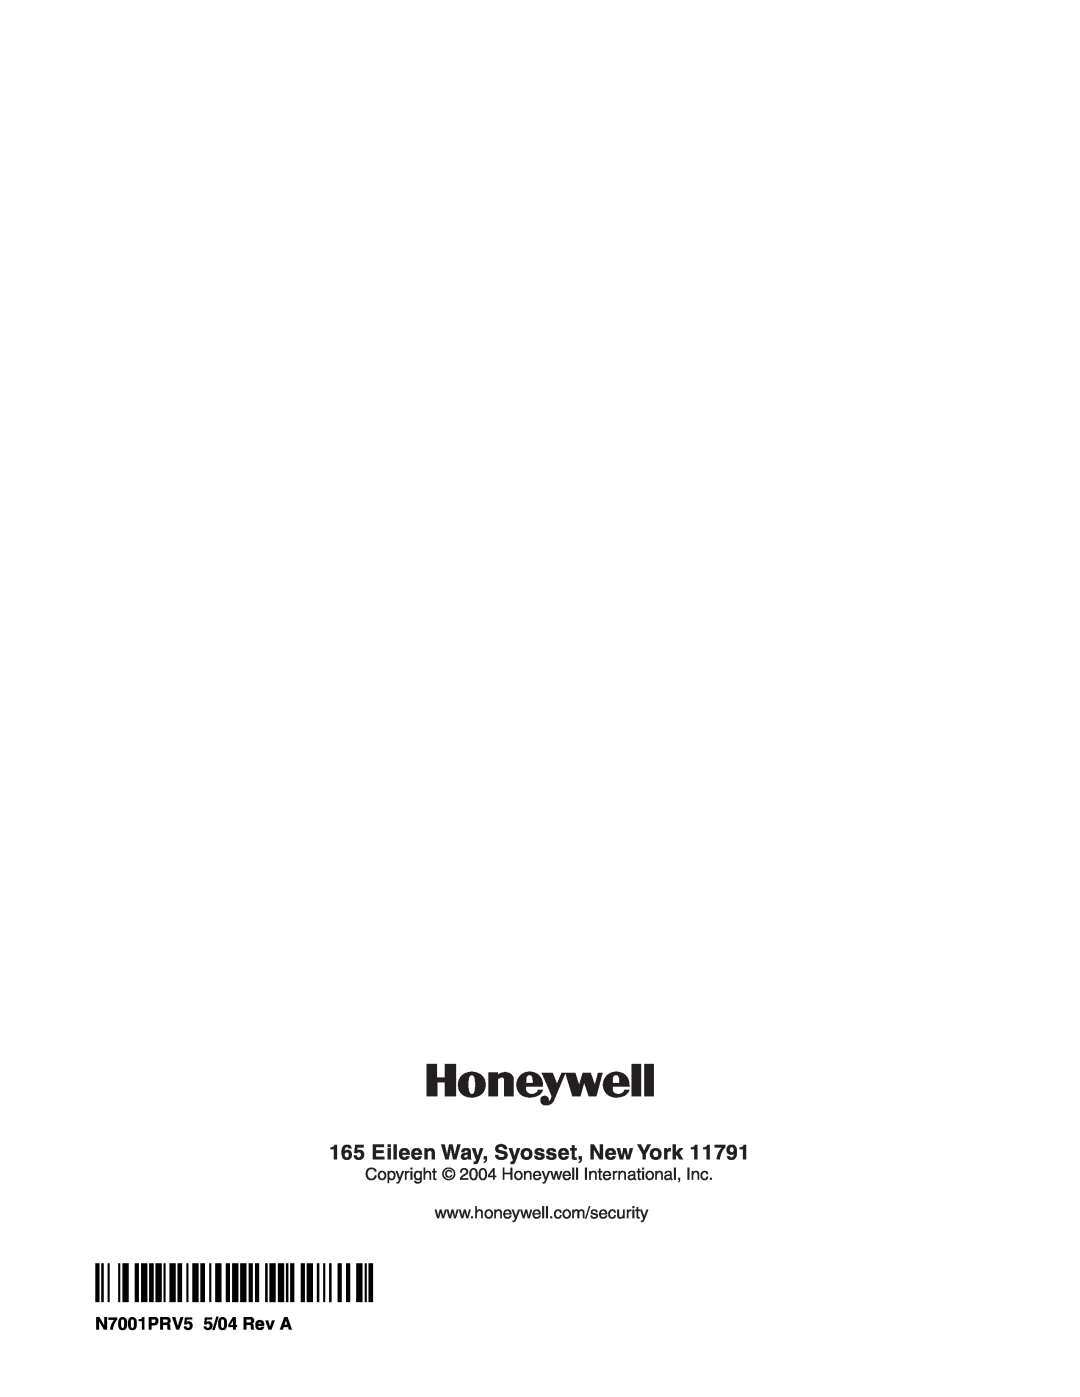 Honeywell VISTA-40, 2-Partitioned Security System manual ¬1359l, Eileen Way, Syosset, New York 